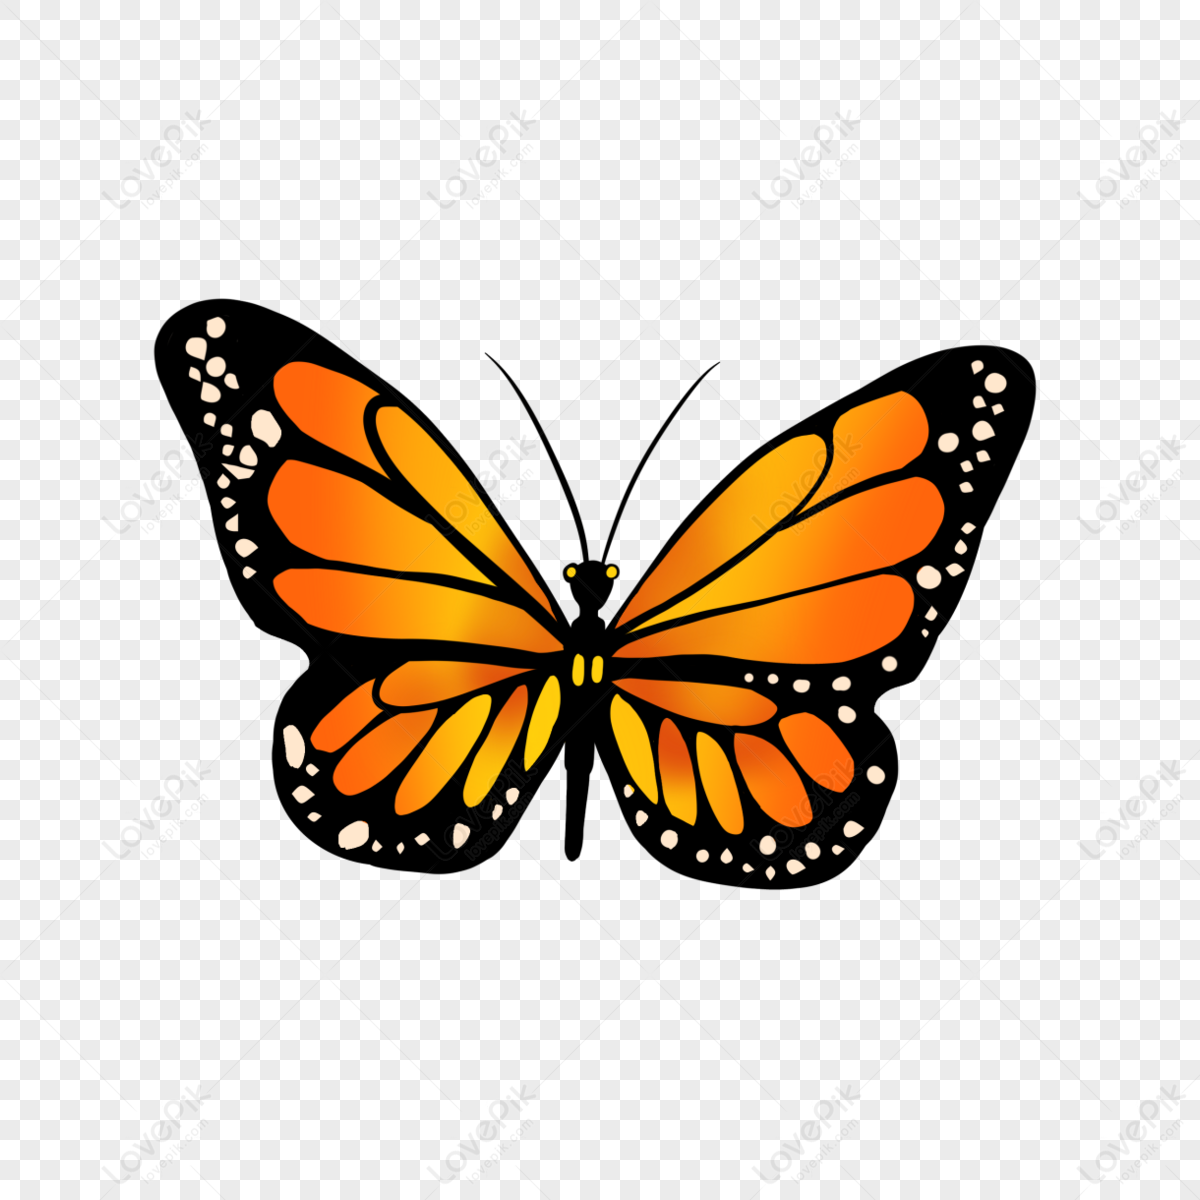 Orange butterfly png images with transparent background free download on